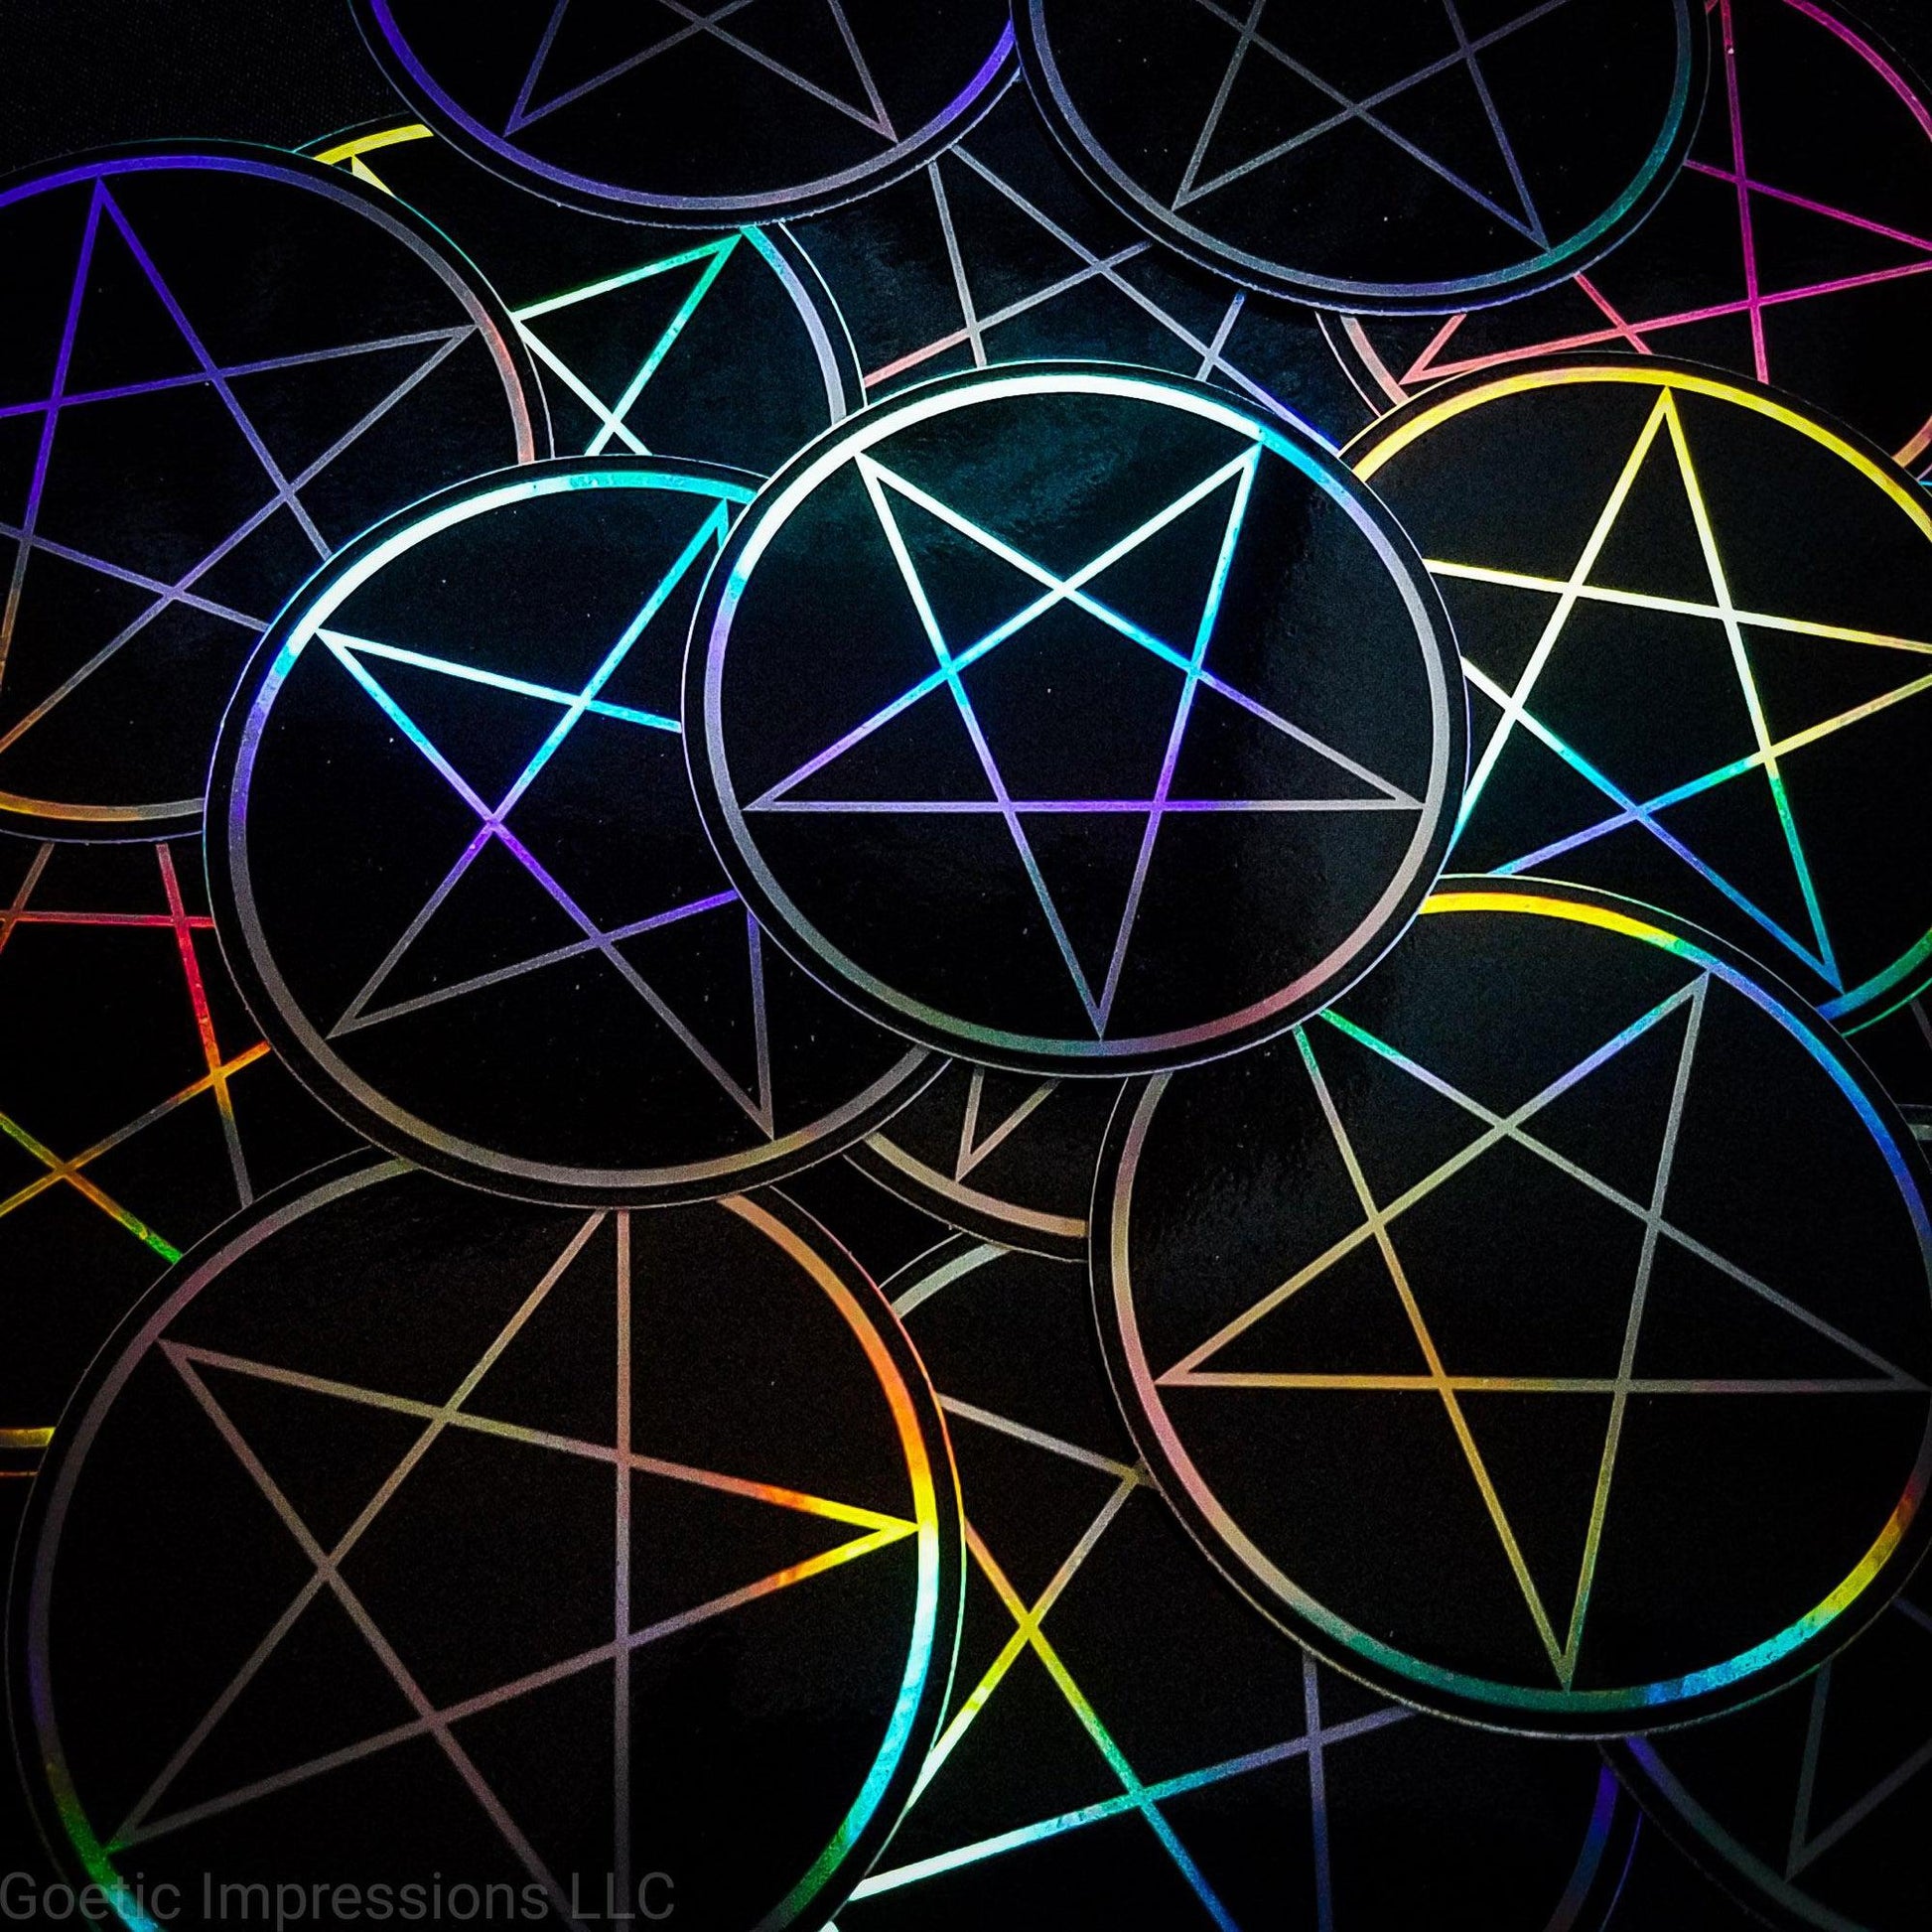 A pile of three inch circular holographic stickers. The stickers have a black background and a white symbol featuring the a traditional pentacle. The holographic paper shines in a wide arrange of rainbow colors when the light catches it at different angles. 